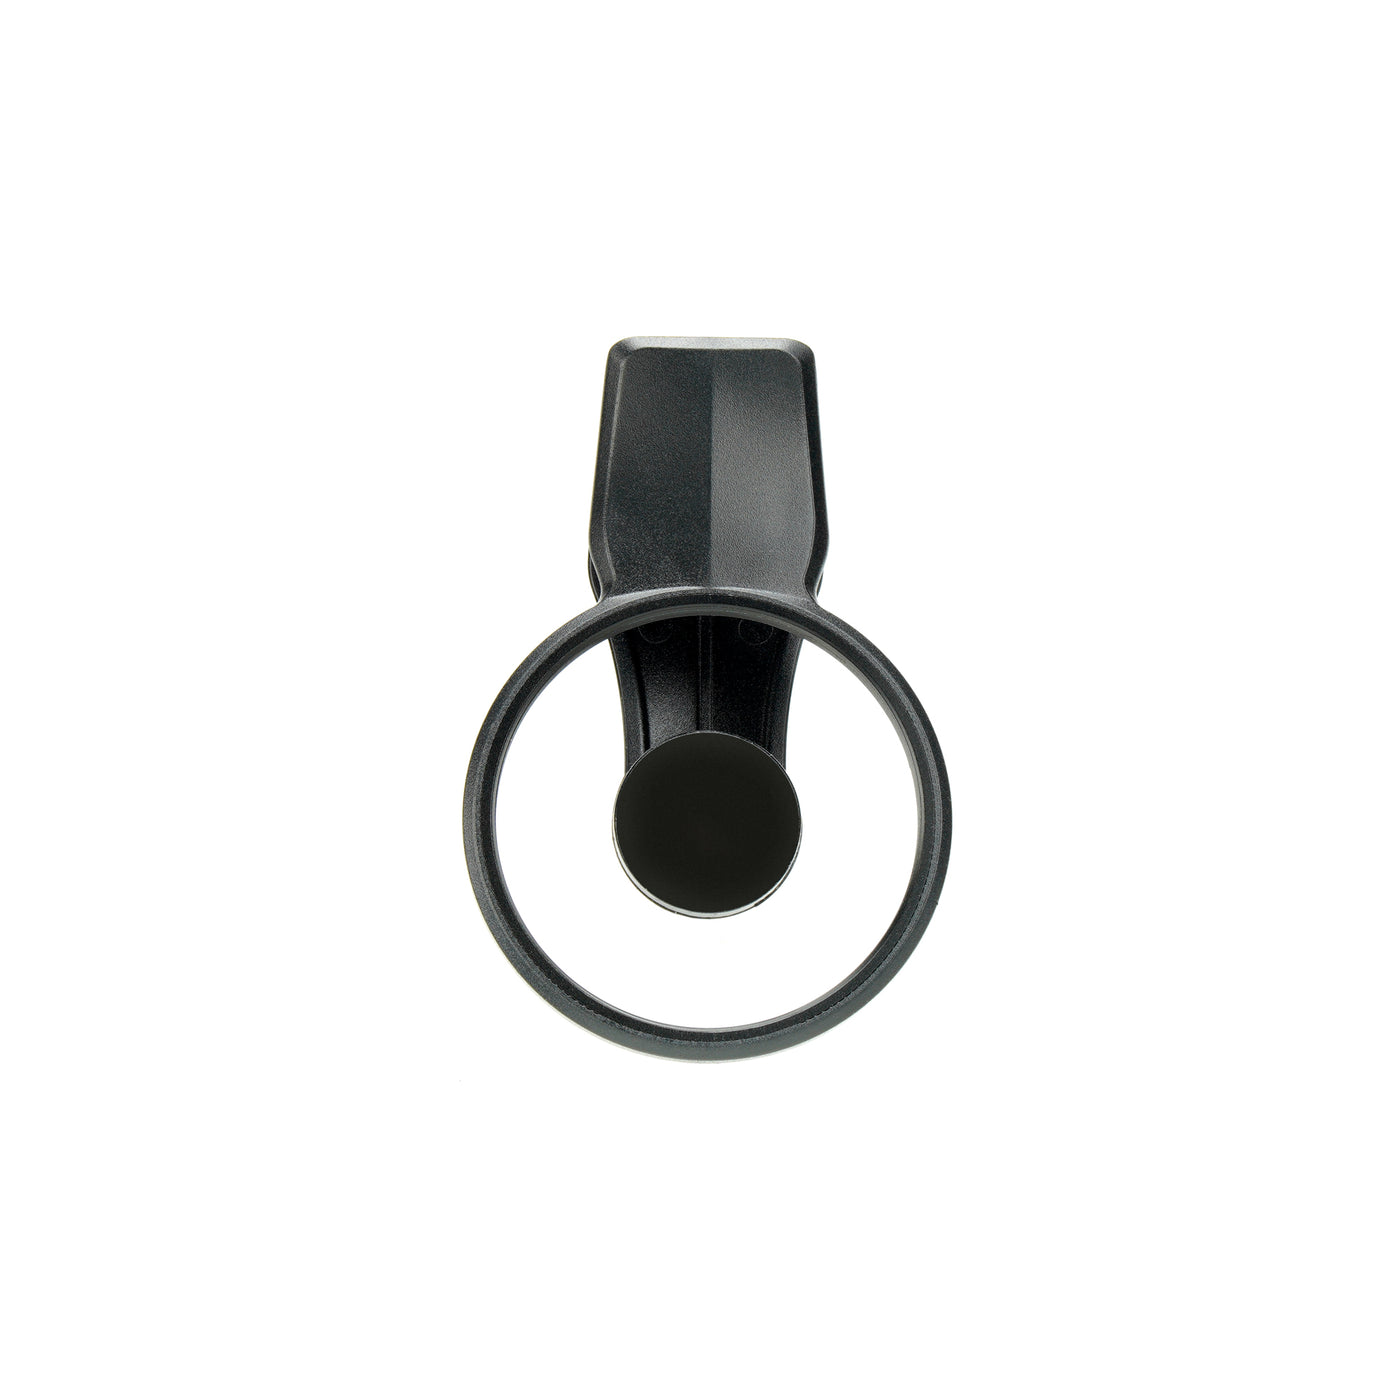 EXAPRO Filter Clip for Smartphones